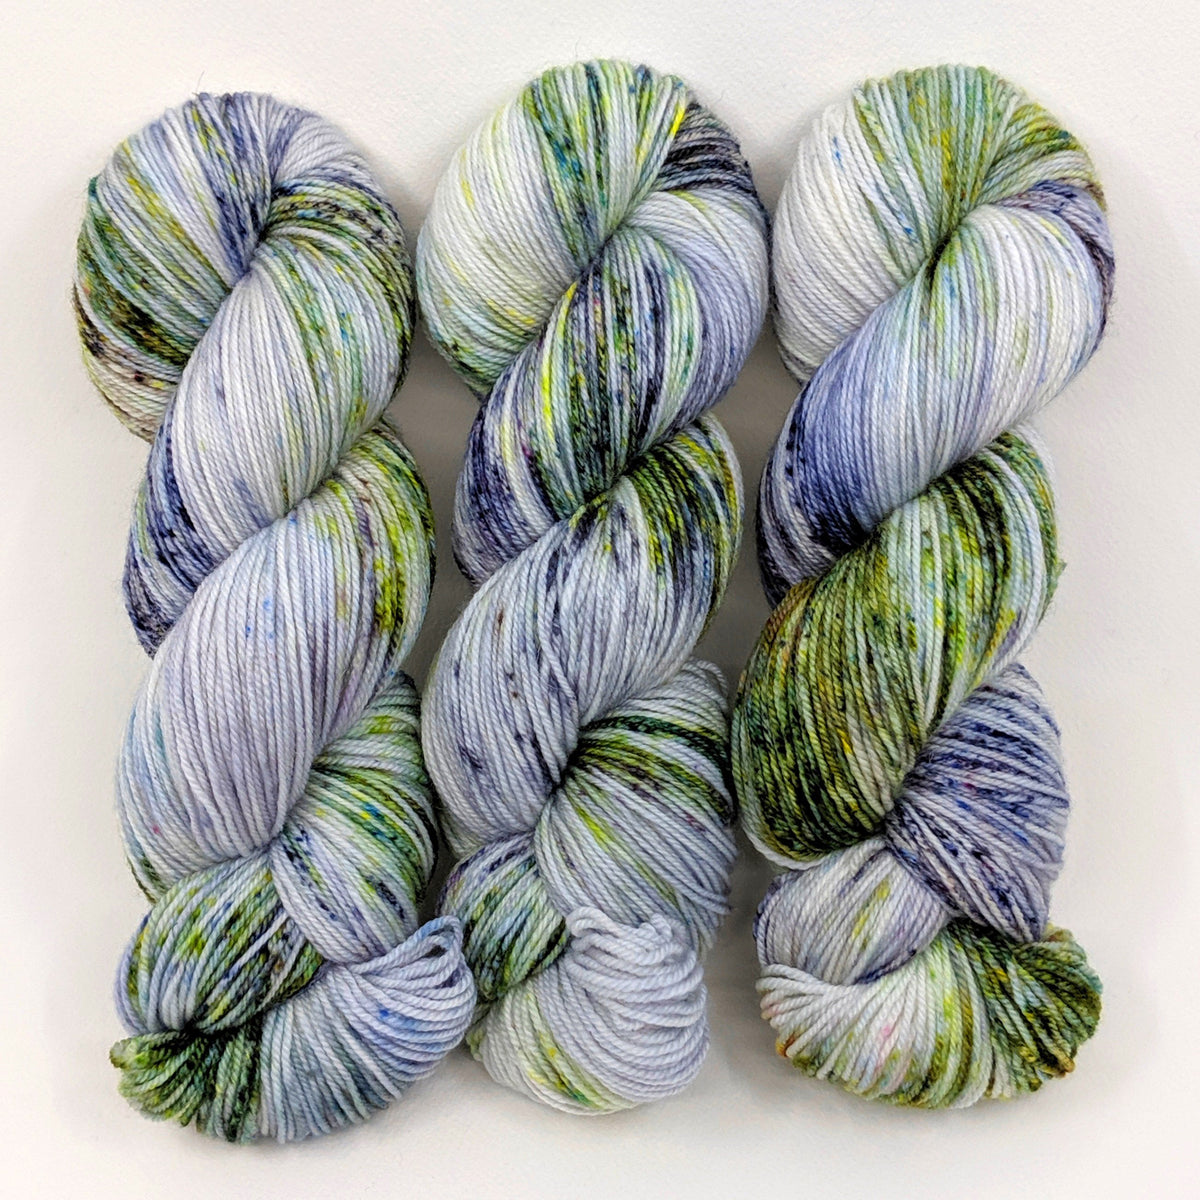 Rocky Mountain Snowfall - Revival Worsted - Dyed Stock